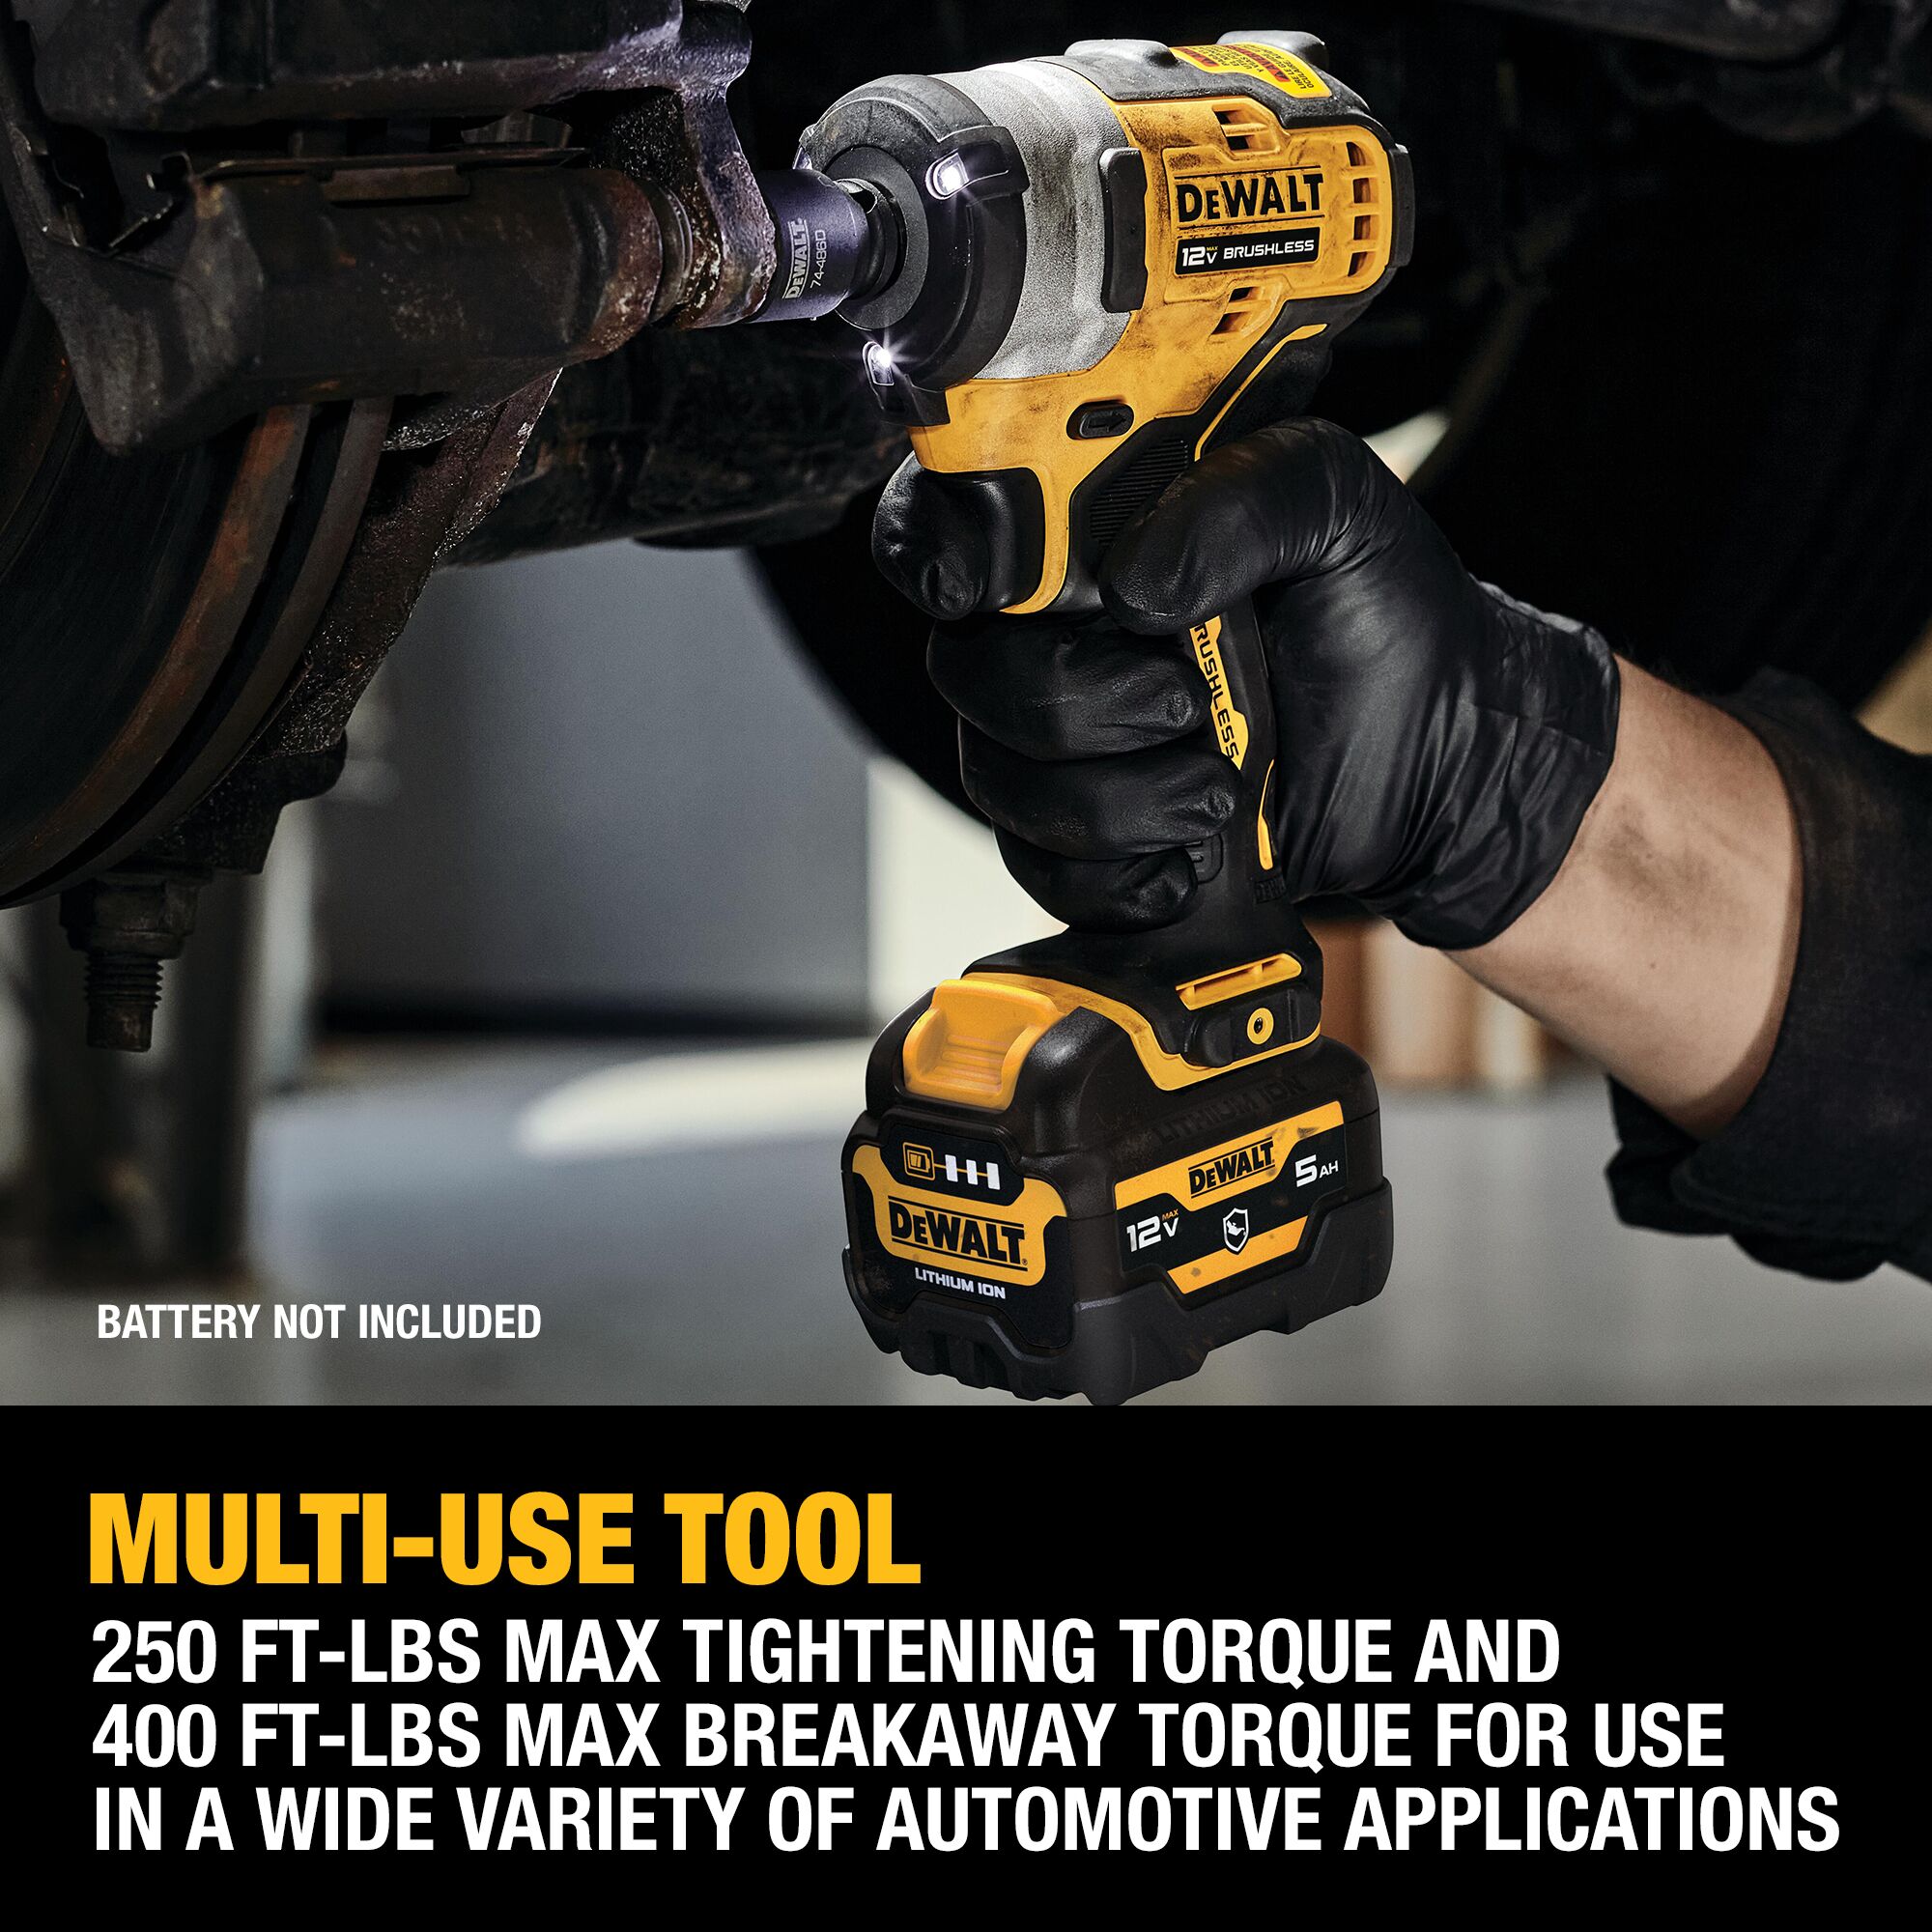 XTREME 12V MAX* Brushless 1/2 in. Cordless Impact Wrench (Tool Only)